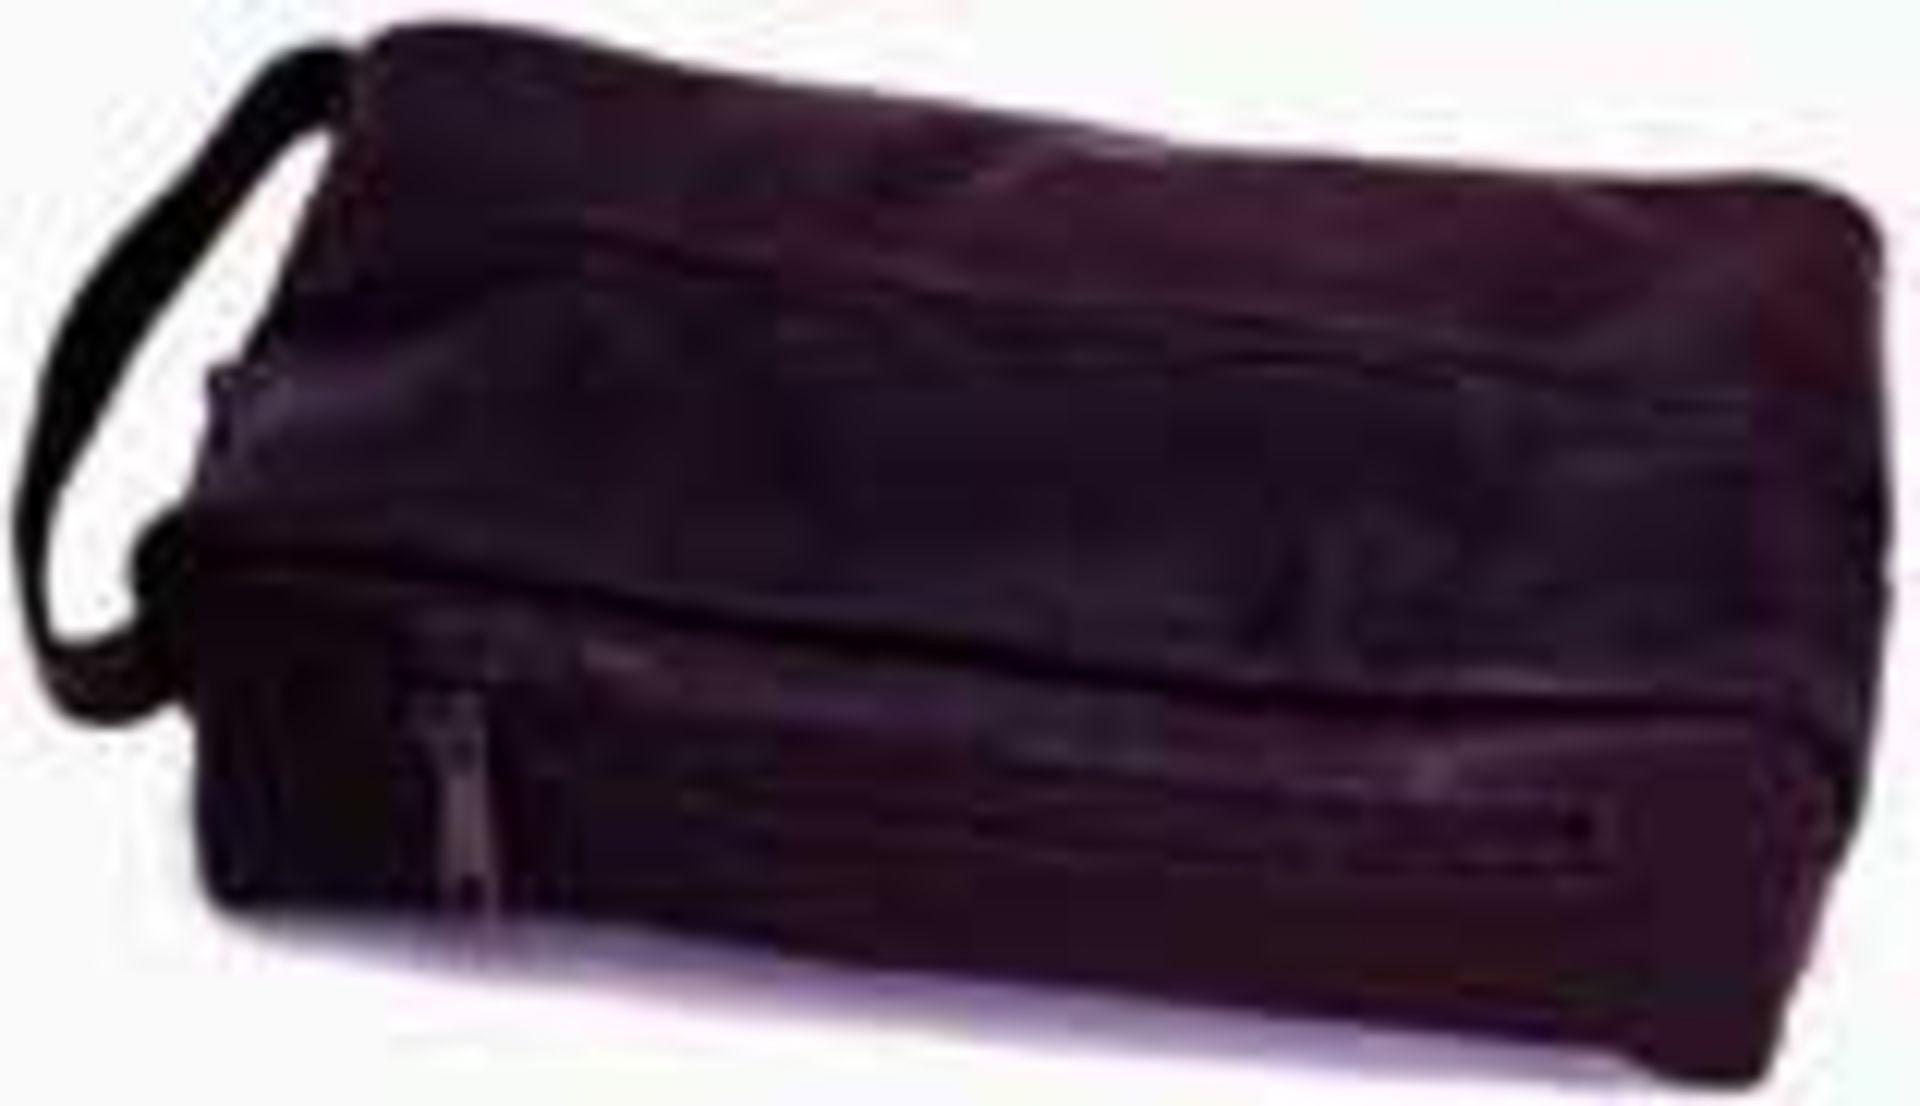 (12) Leather travel kit with both top and side zippers. Just the right size for briefcase. The